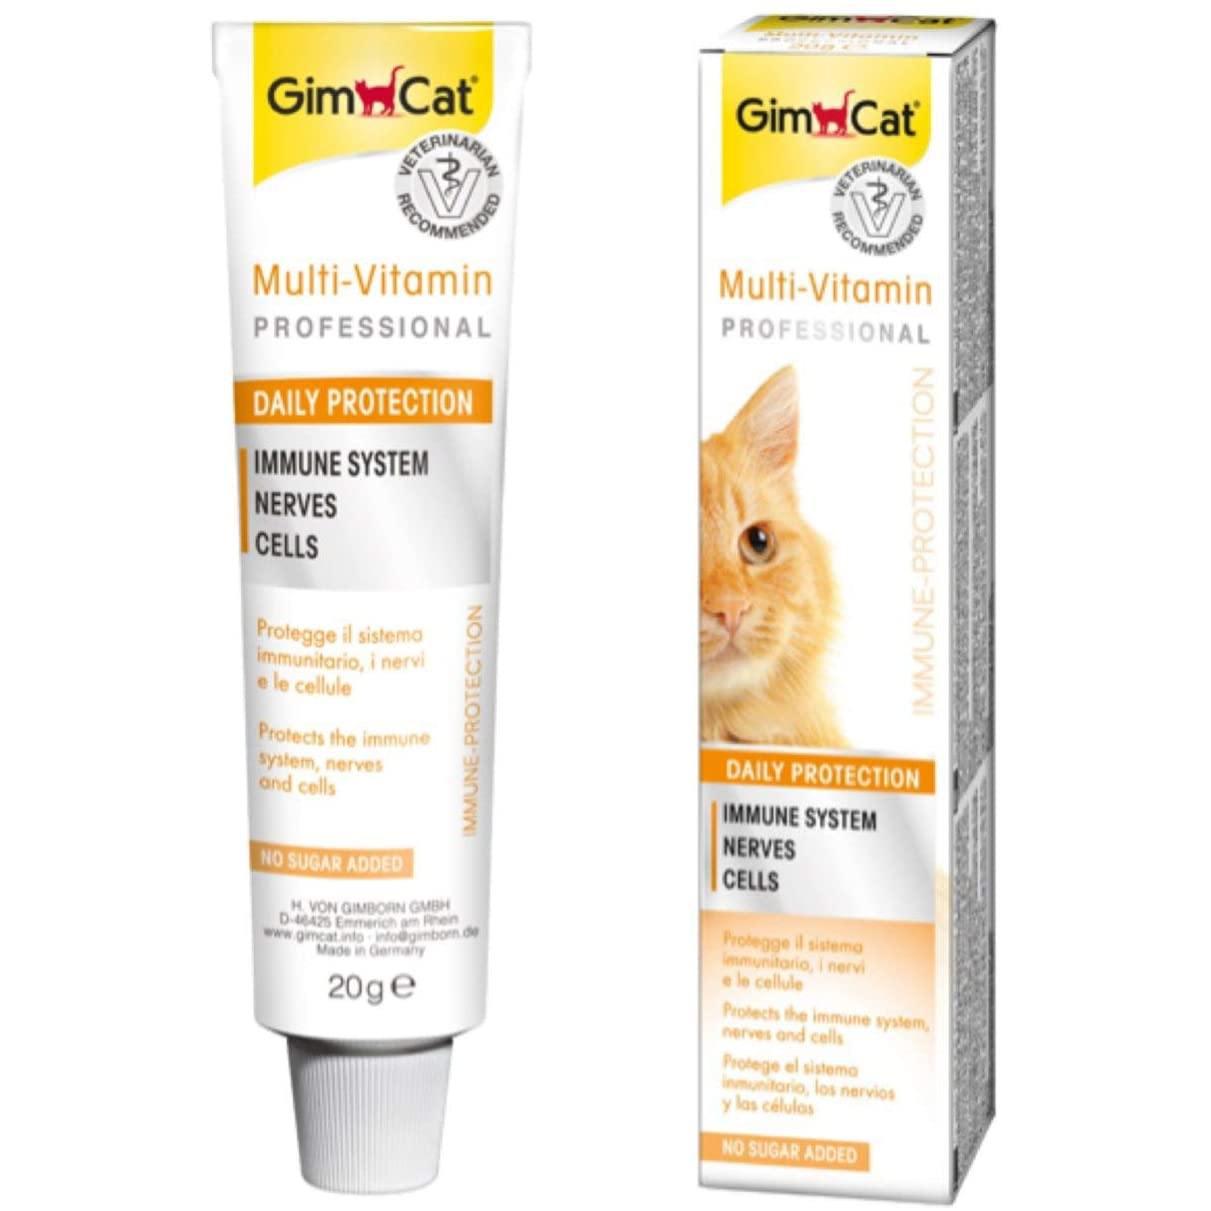 Gimcat Pasta Multi-Vitamin Professional Daily Protection Immune Support 20 Gr